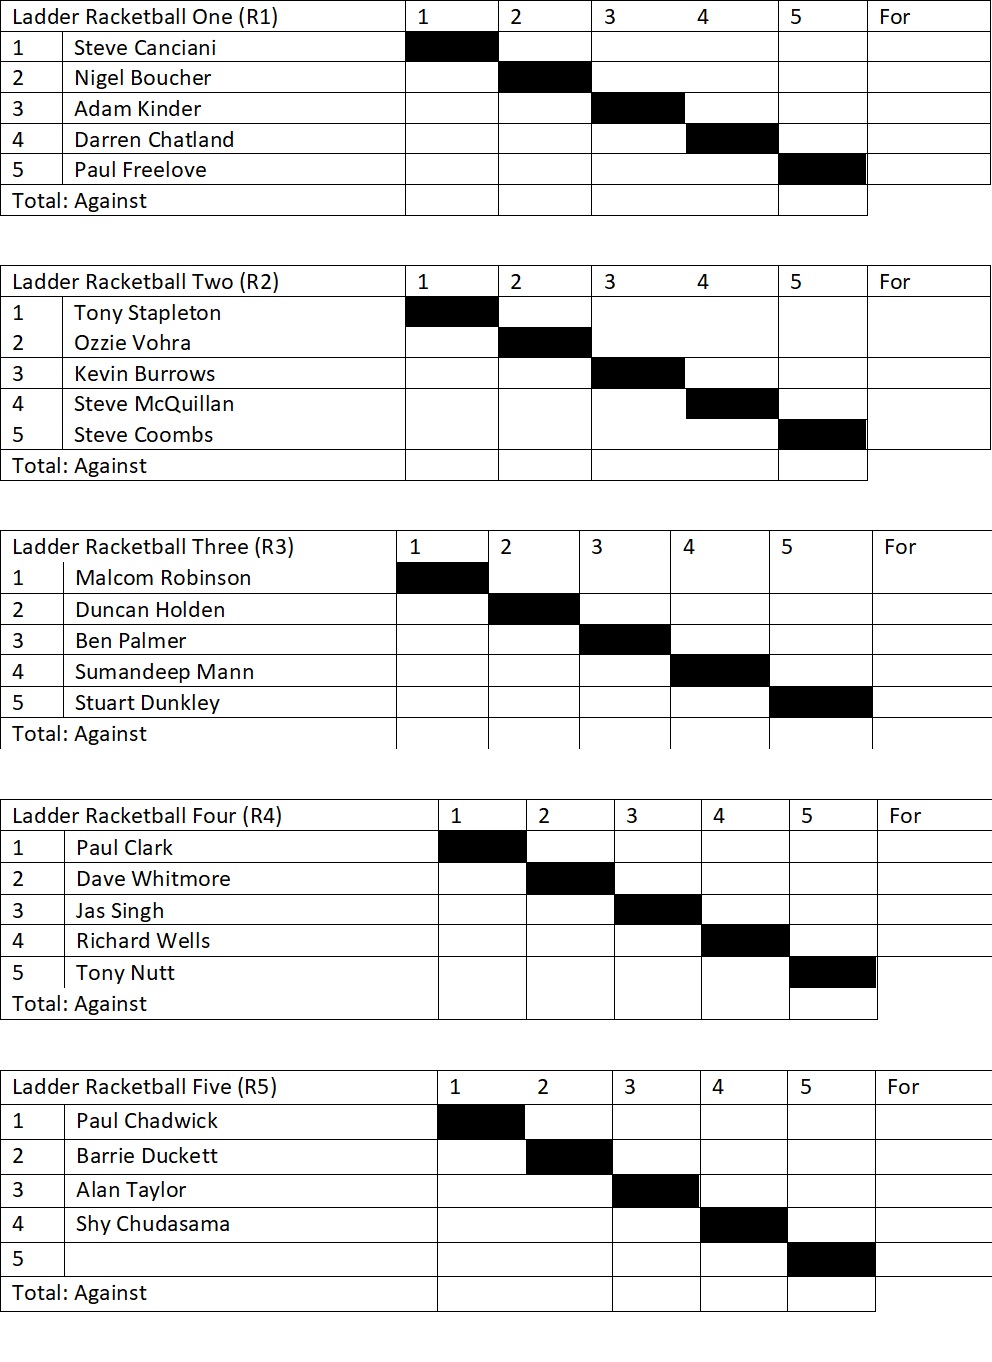 racketball ladder 060921 to 081021 